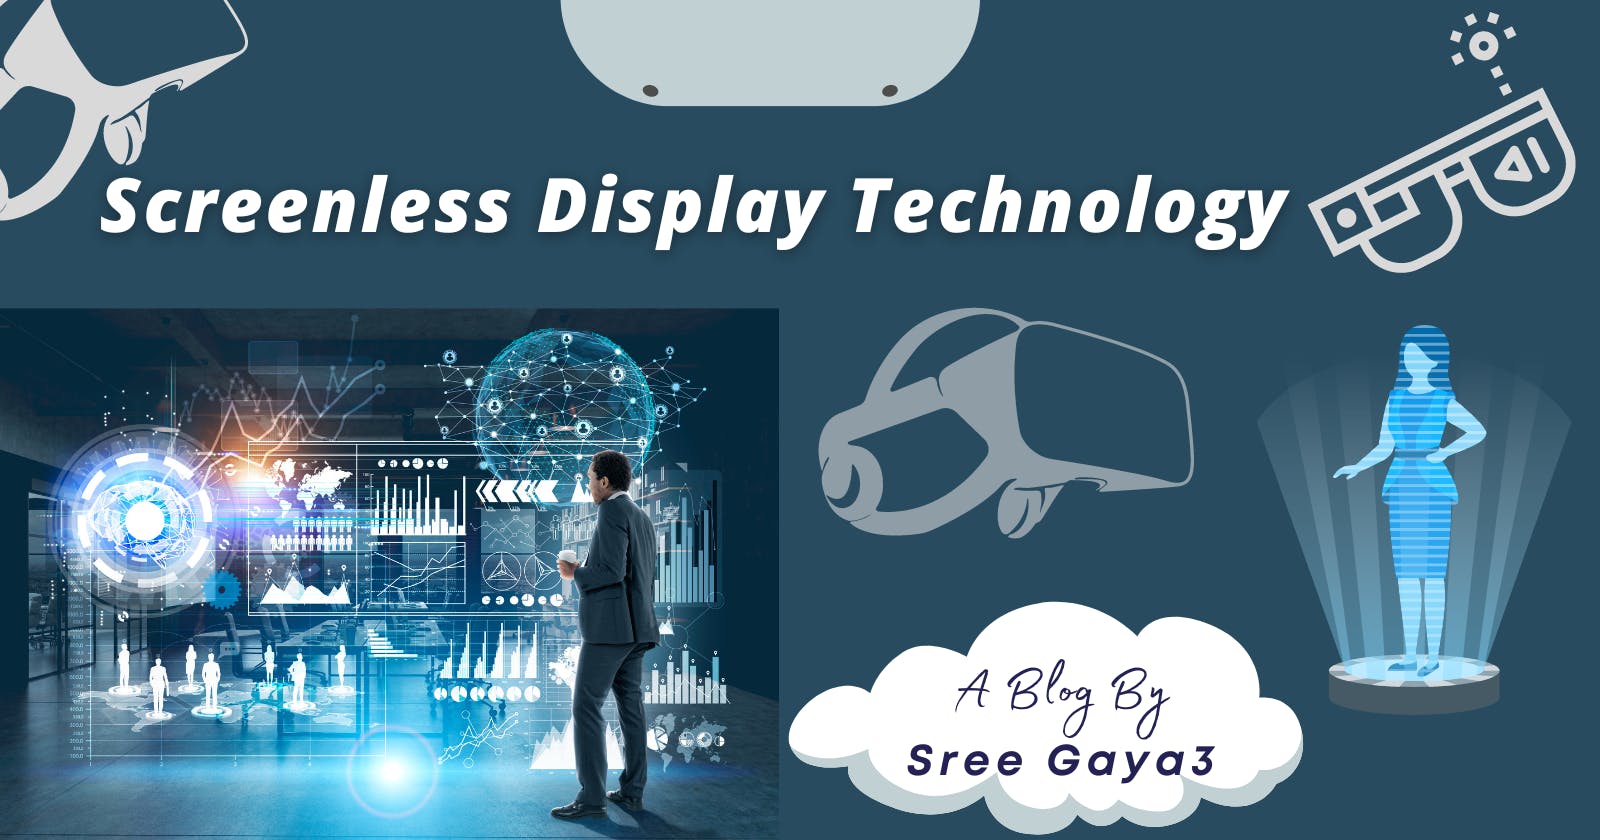 Screenless Display Technology